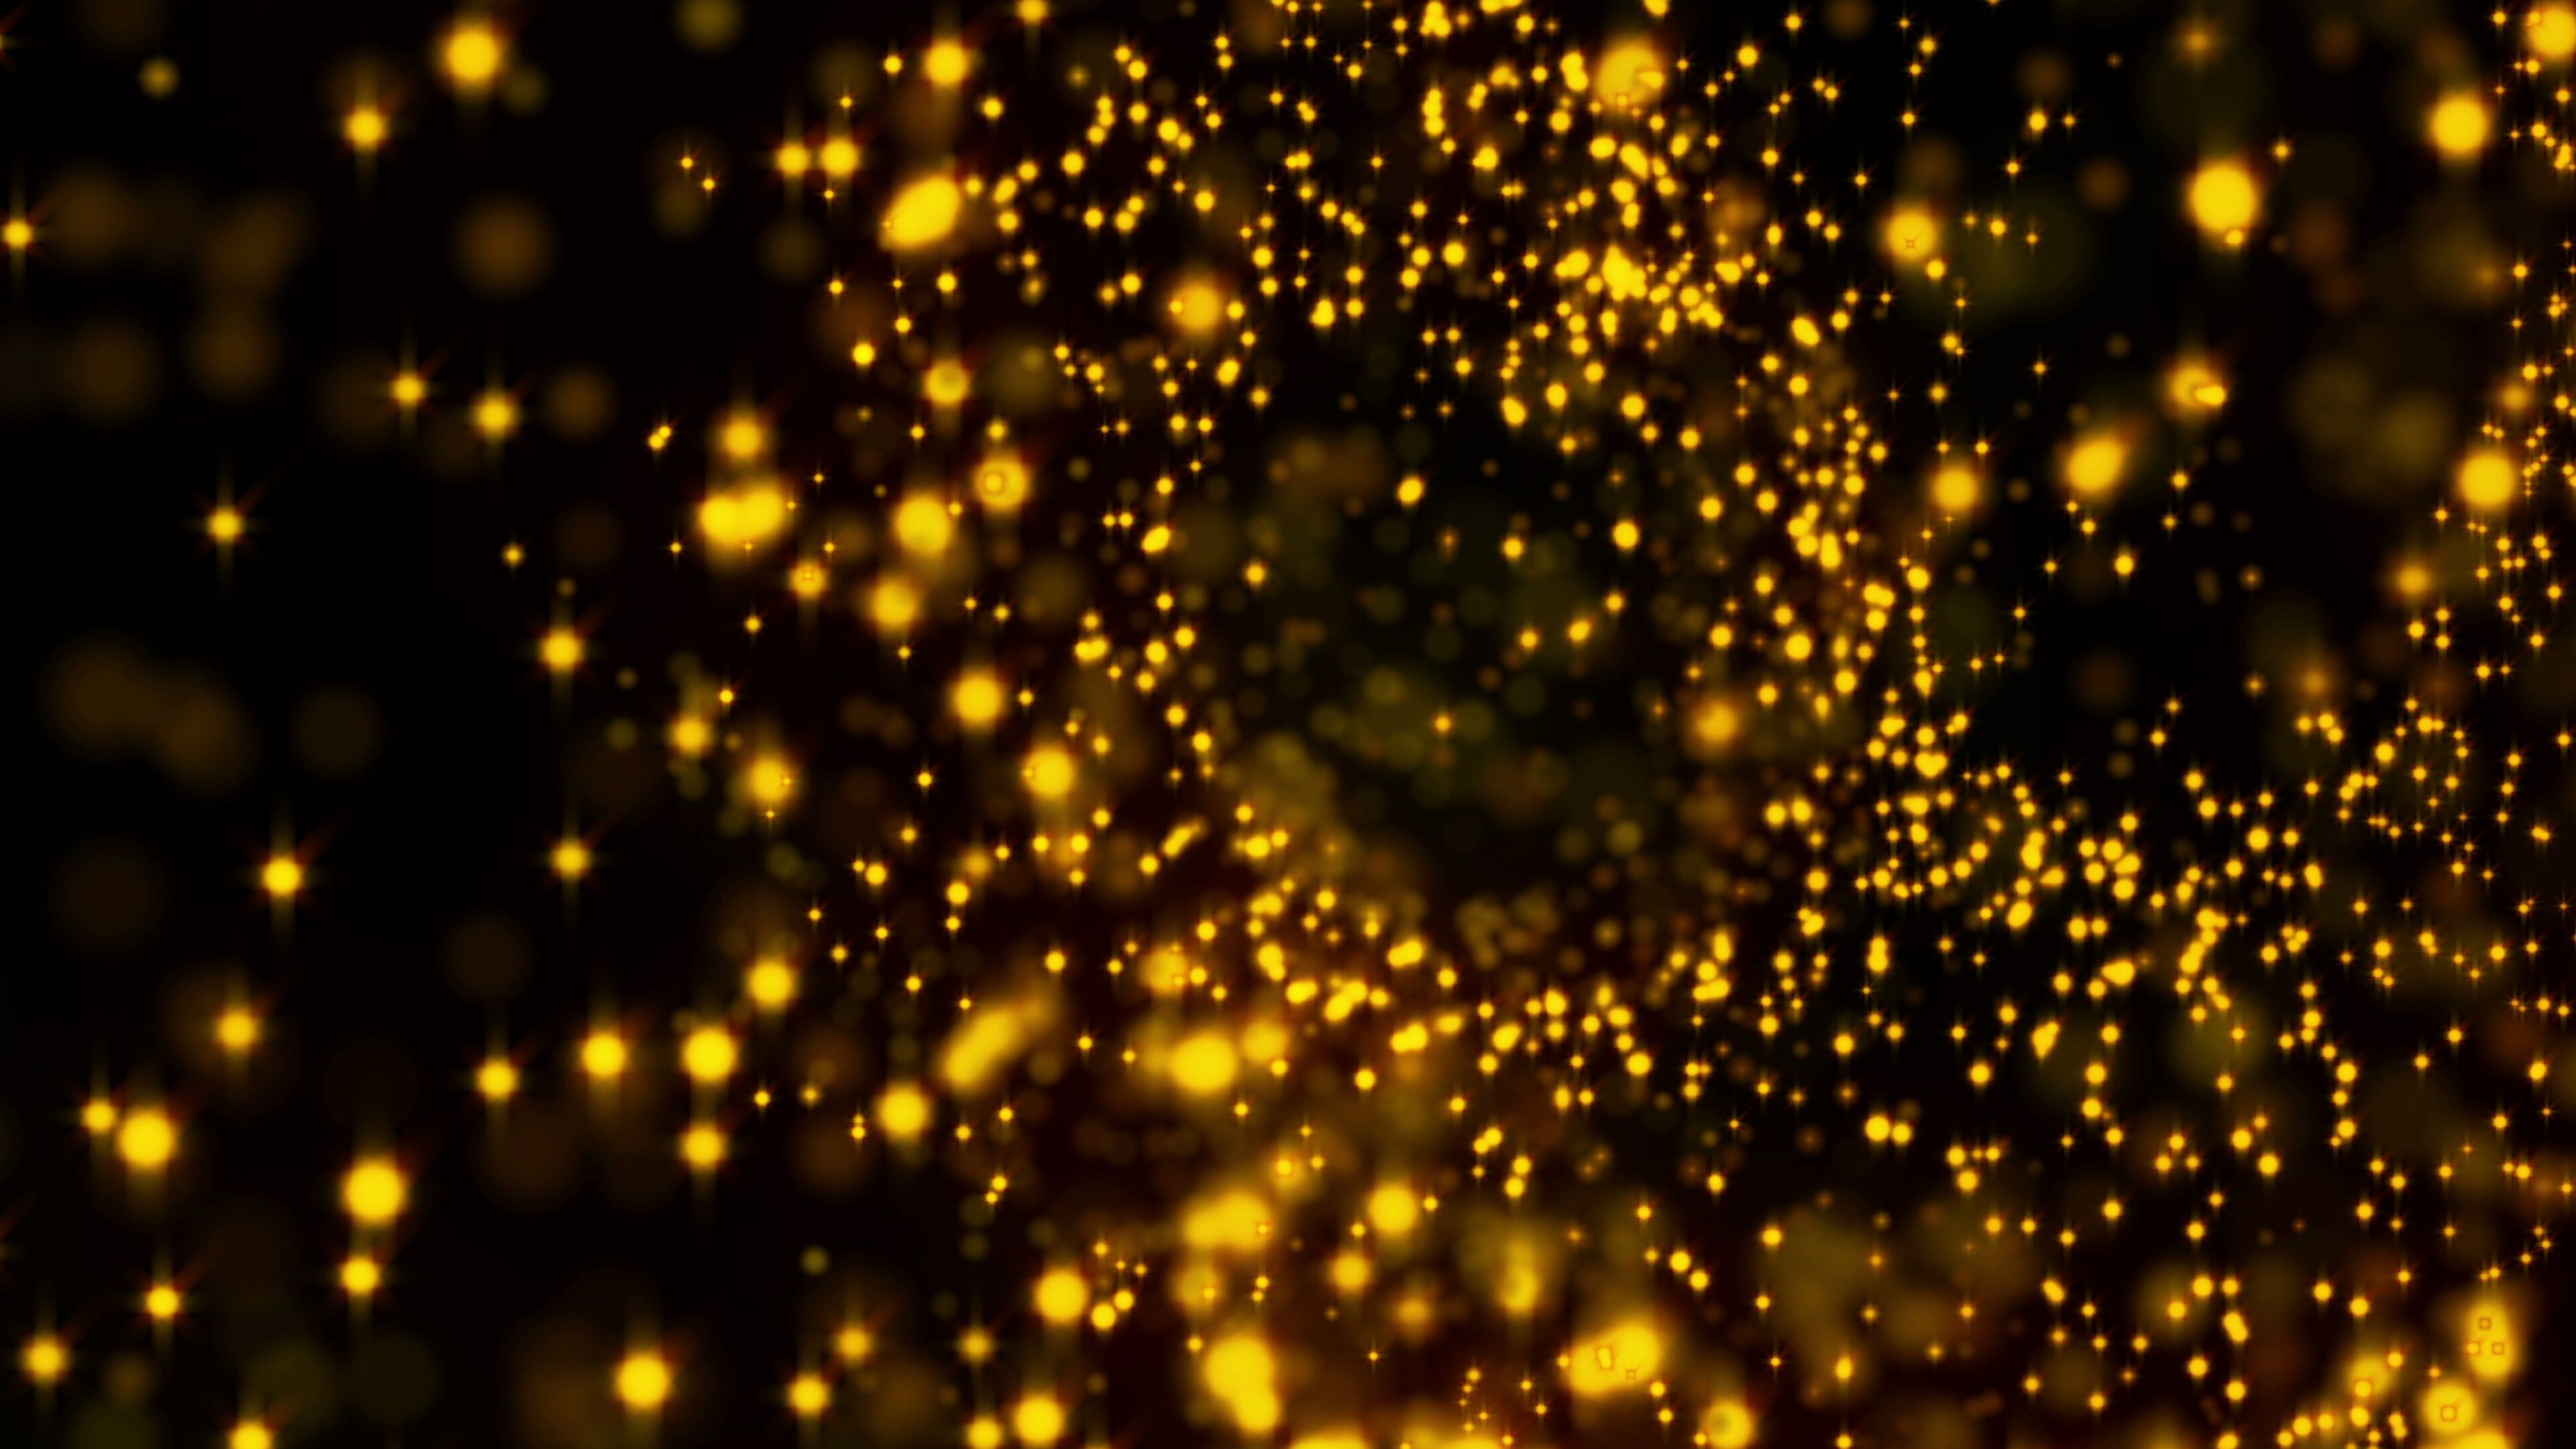 Gold Dots: Gold blurry lights, Astronomical object, Blossom of gold. 3840x2160 4K Background.